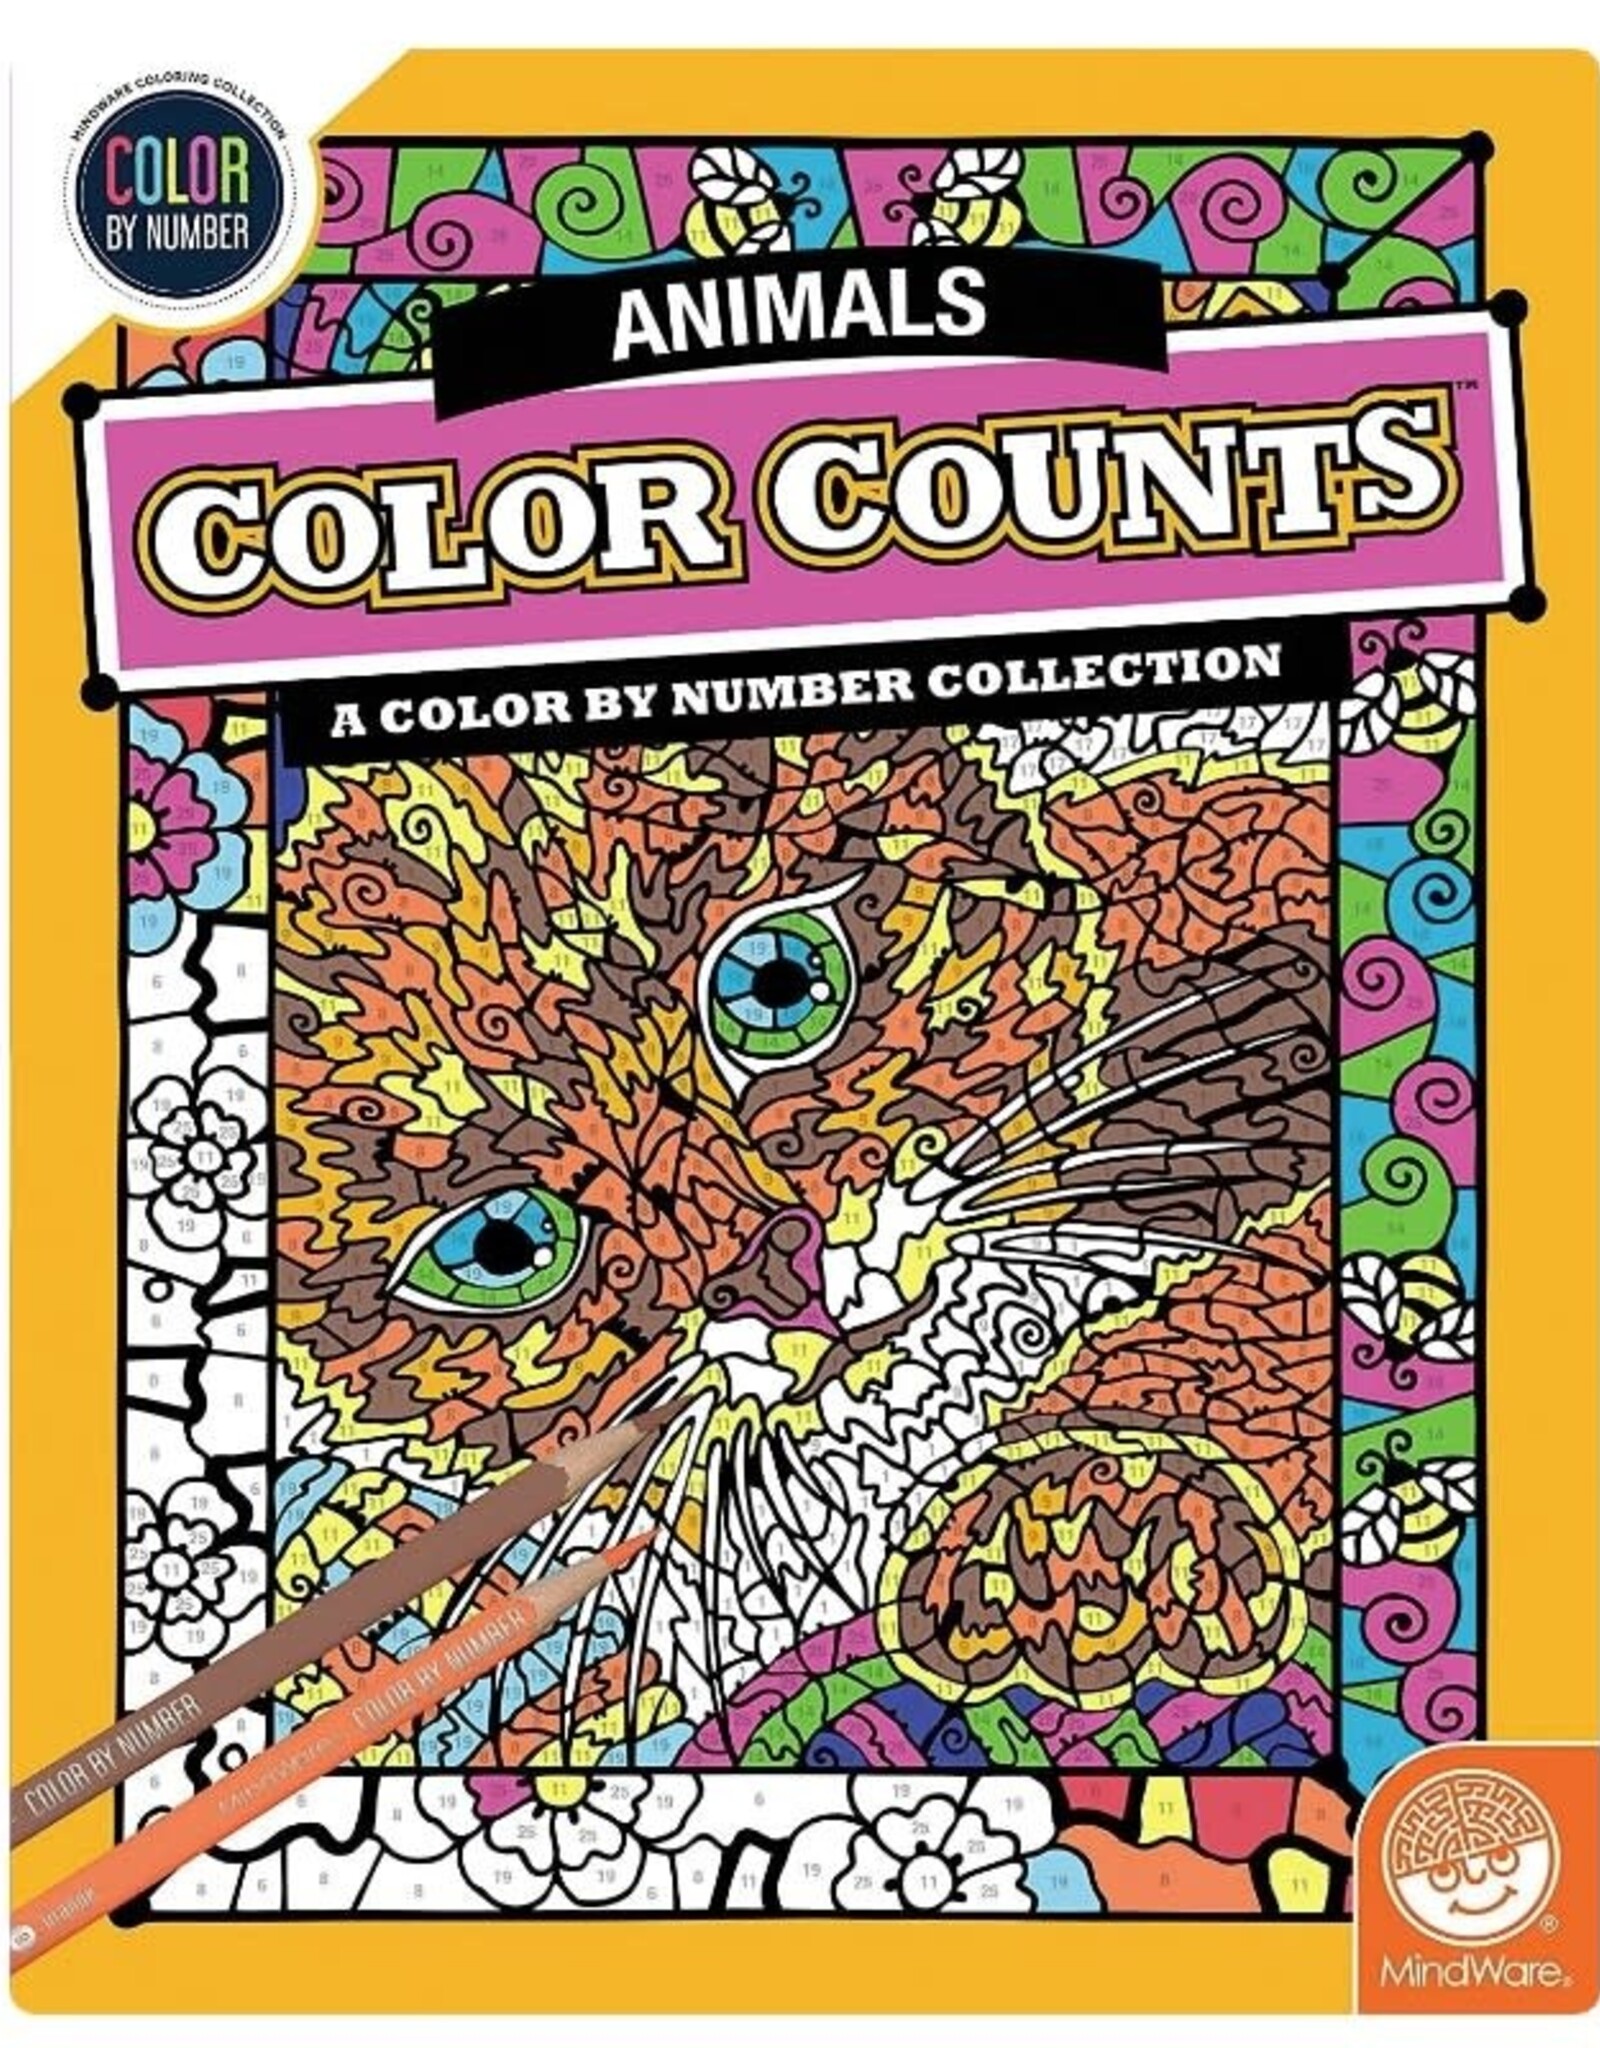 MindWare CBN Color Counts- Animals